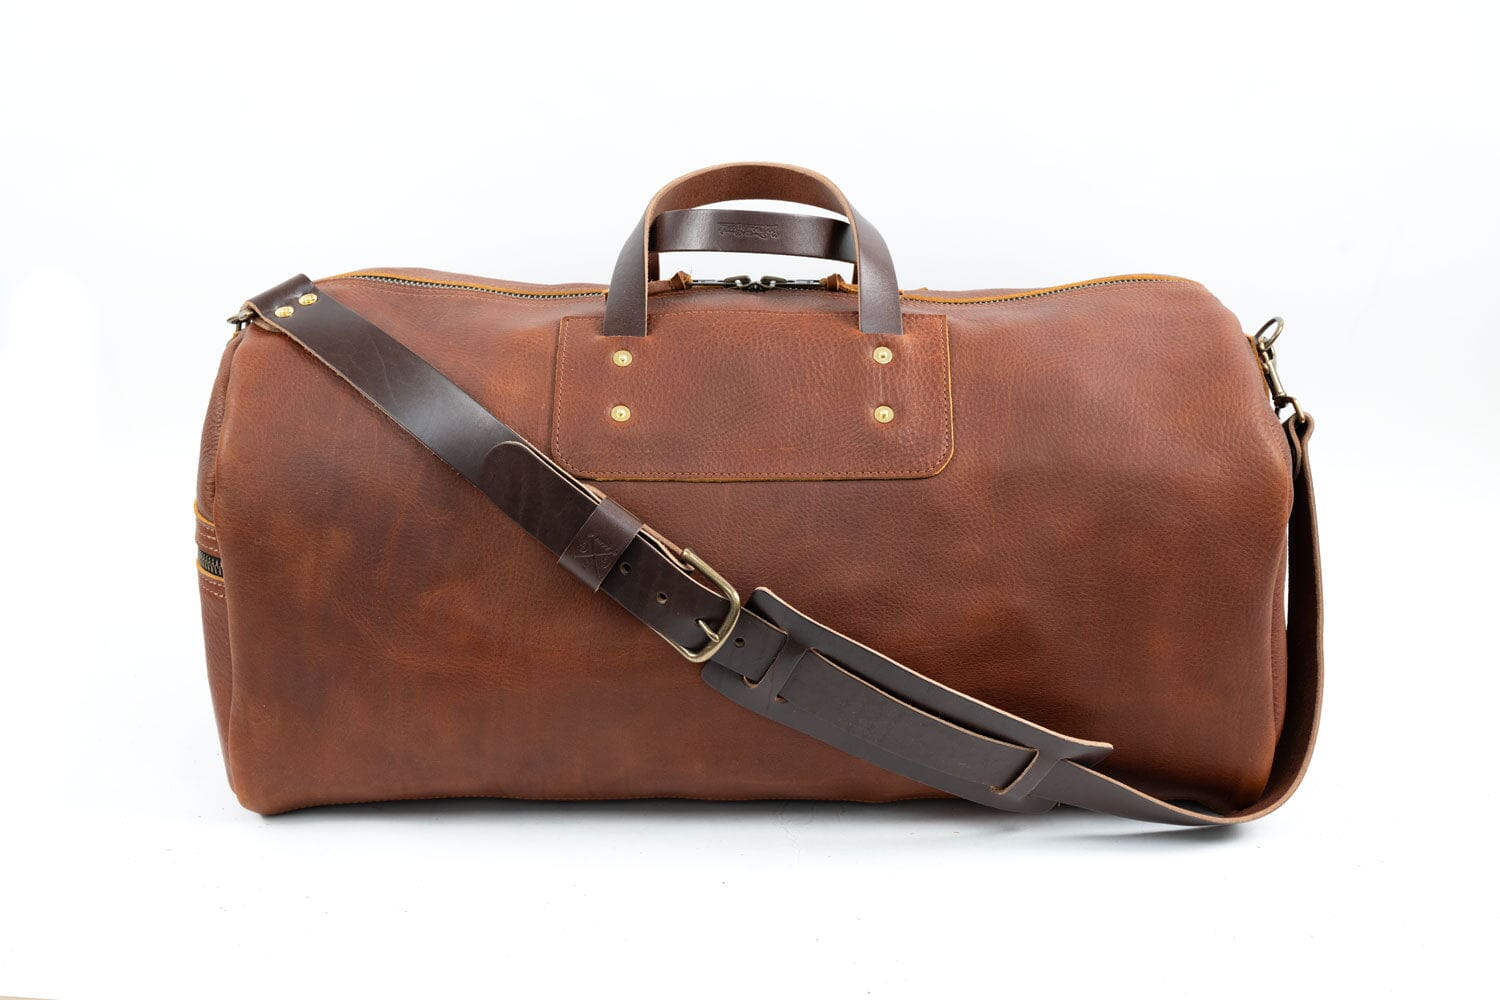 EXPEDITION LEATHER DUFFLE BAG - Go Forth Goods